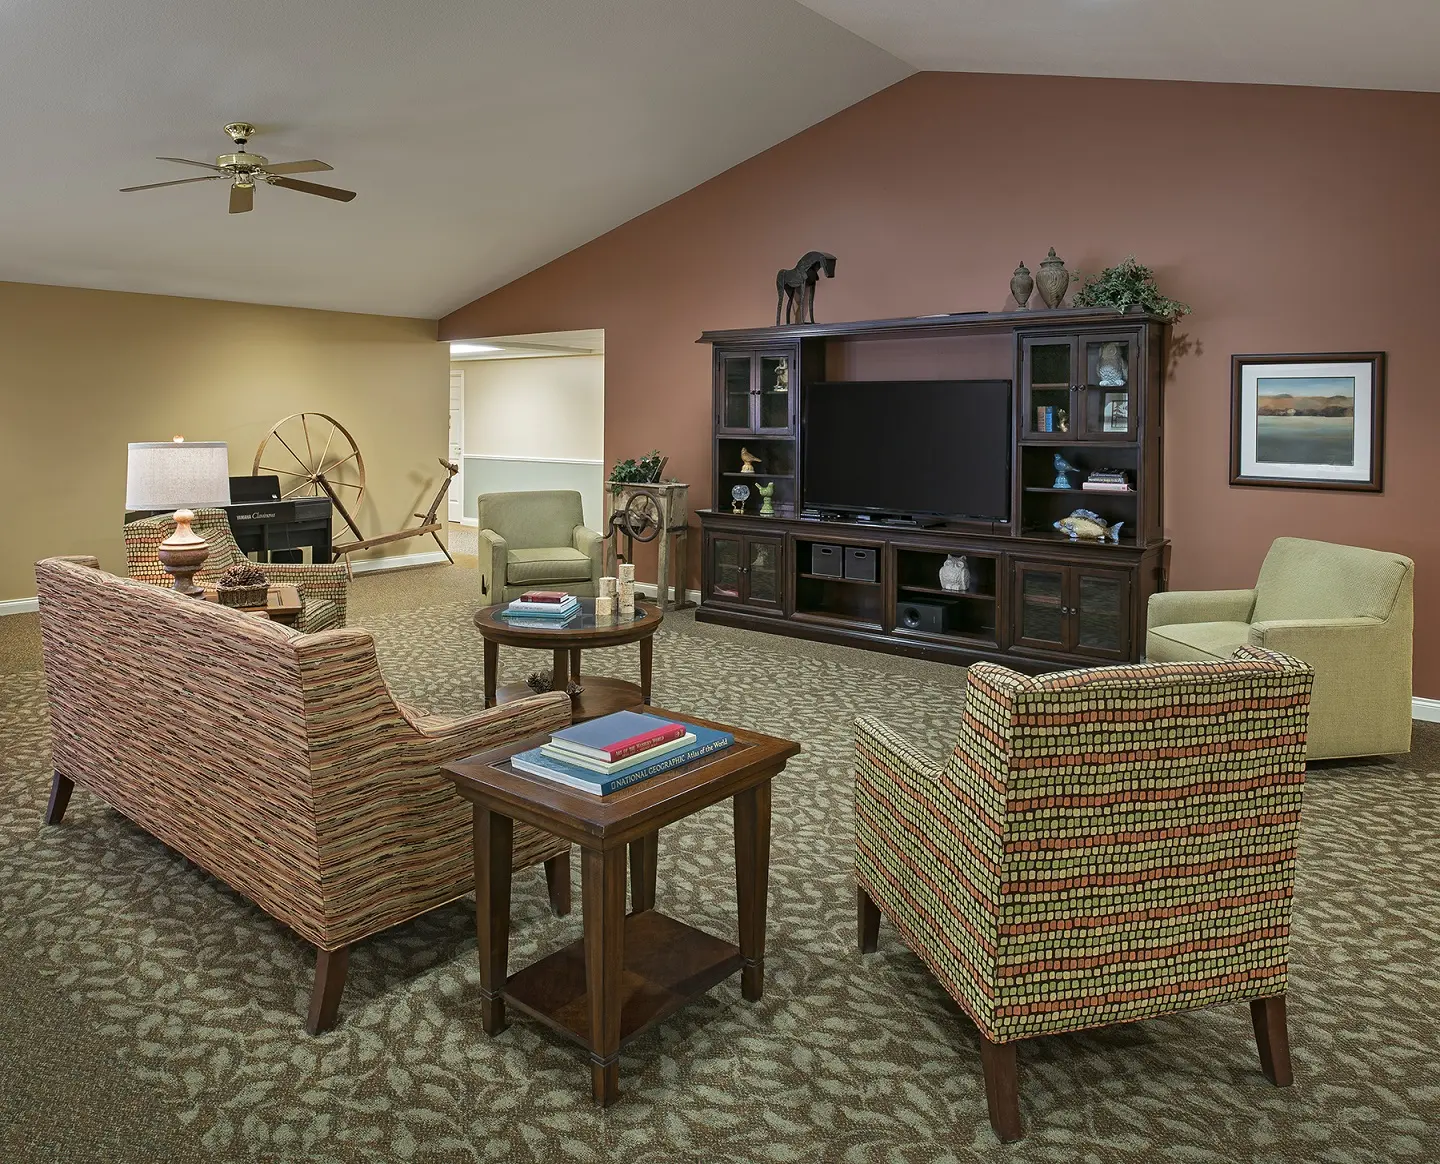 Carpeted common area of American House Charlevoix, a senior living community in Charlevoix, Michigan